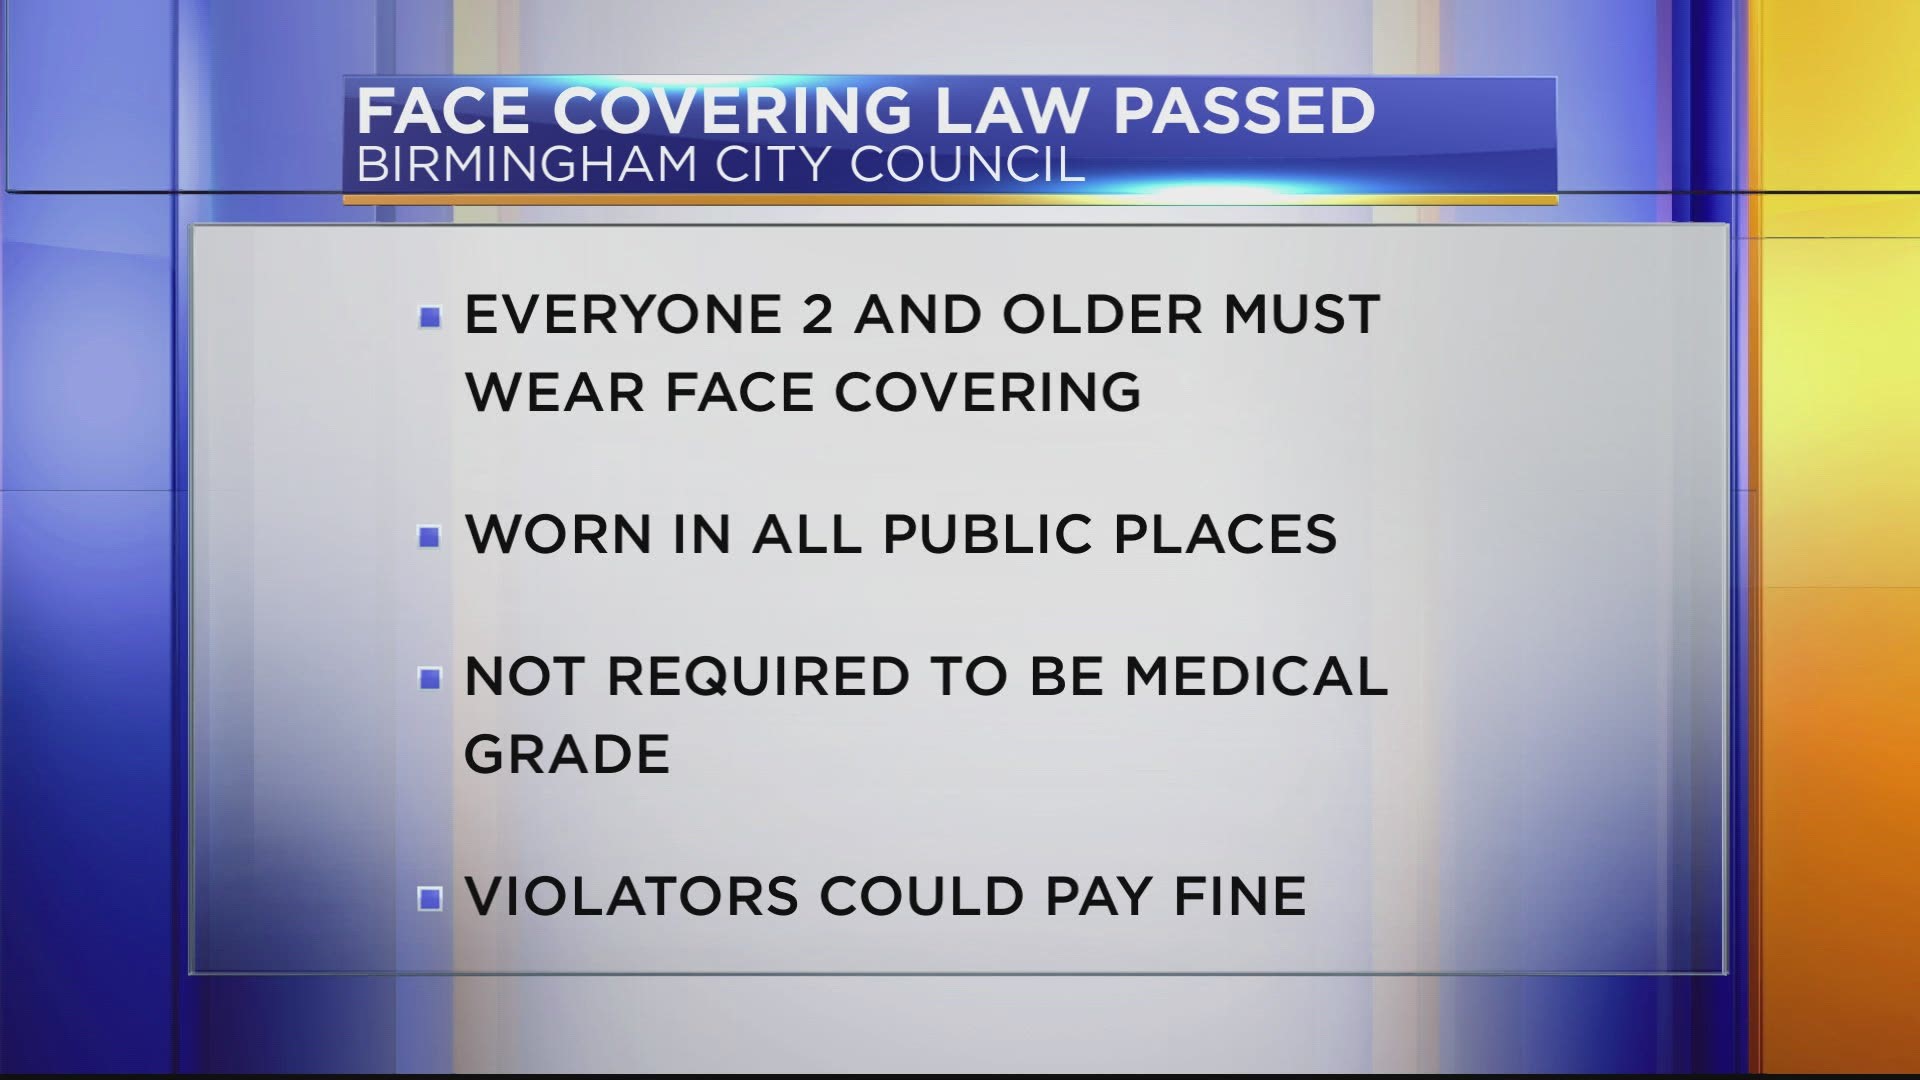 The ordinance requires an item to cover the nose and mouth of a person to limit the spread of coronavirus